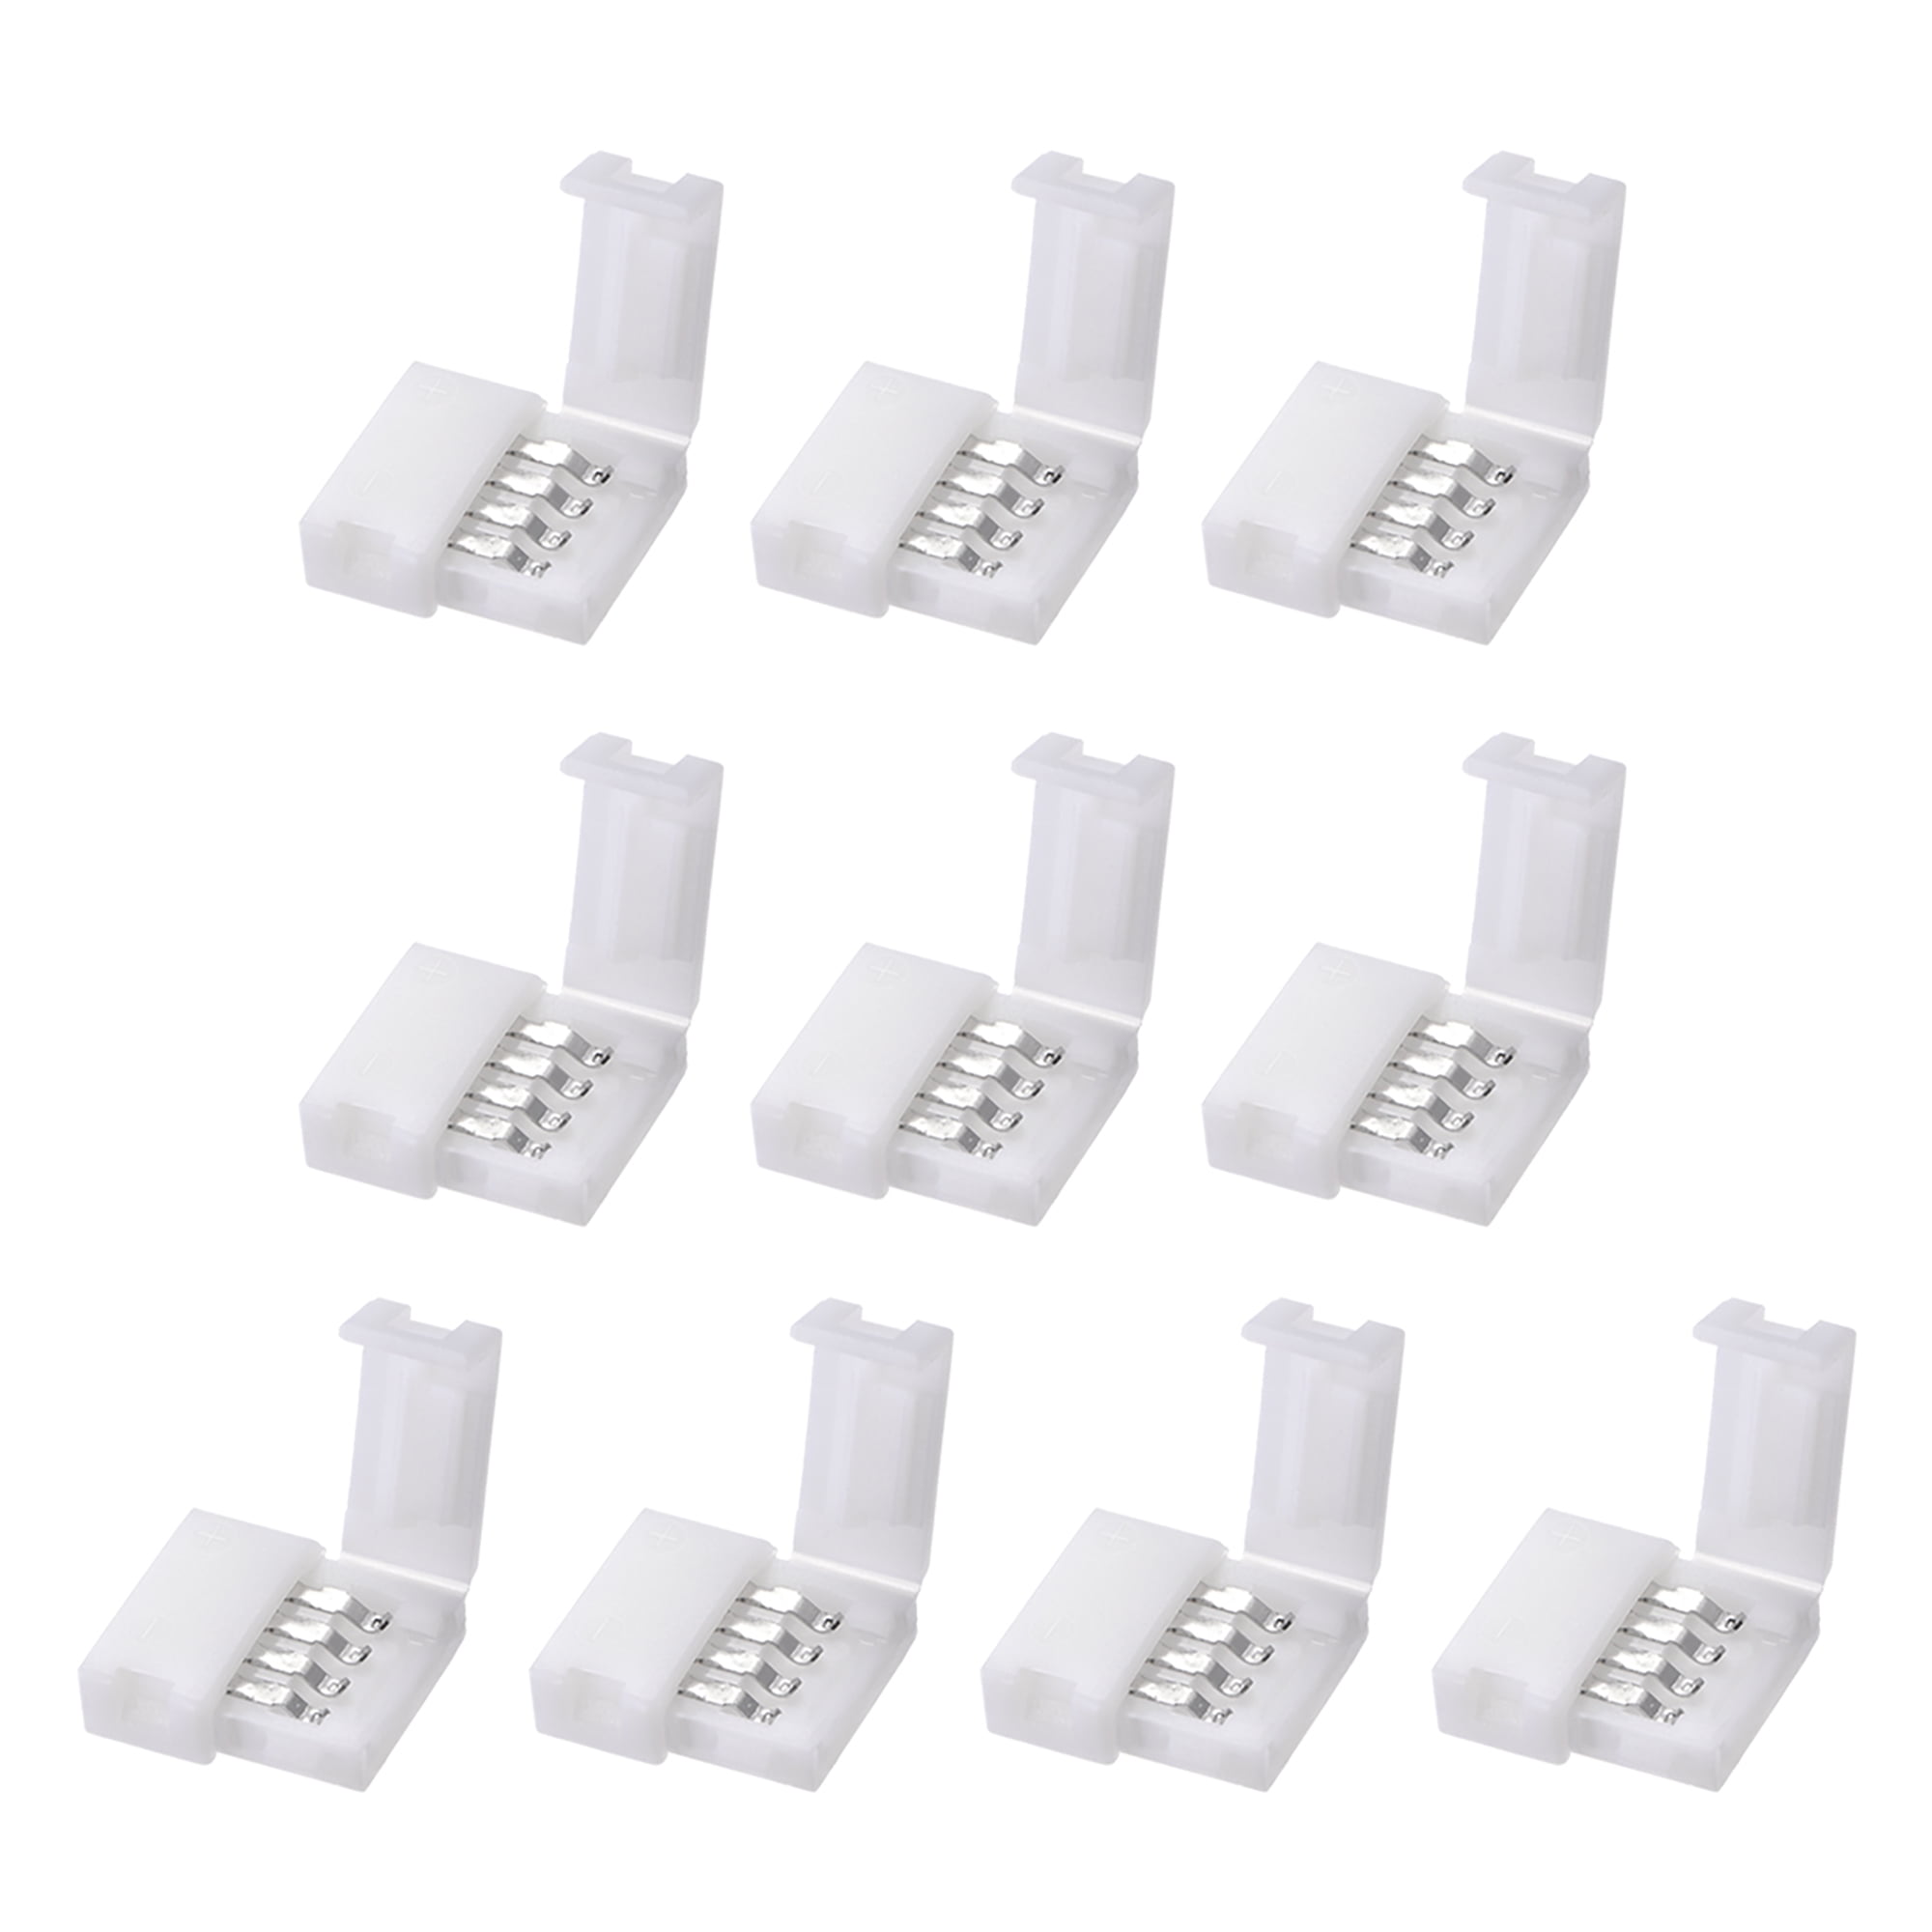 10pcs Strip to Wire Connector for 10mm Waterproof LED Strips Lights RGB 5050 4Pin LED Strip Connectors 